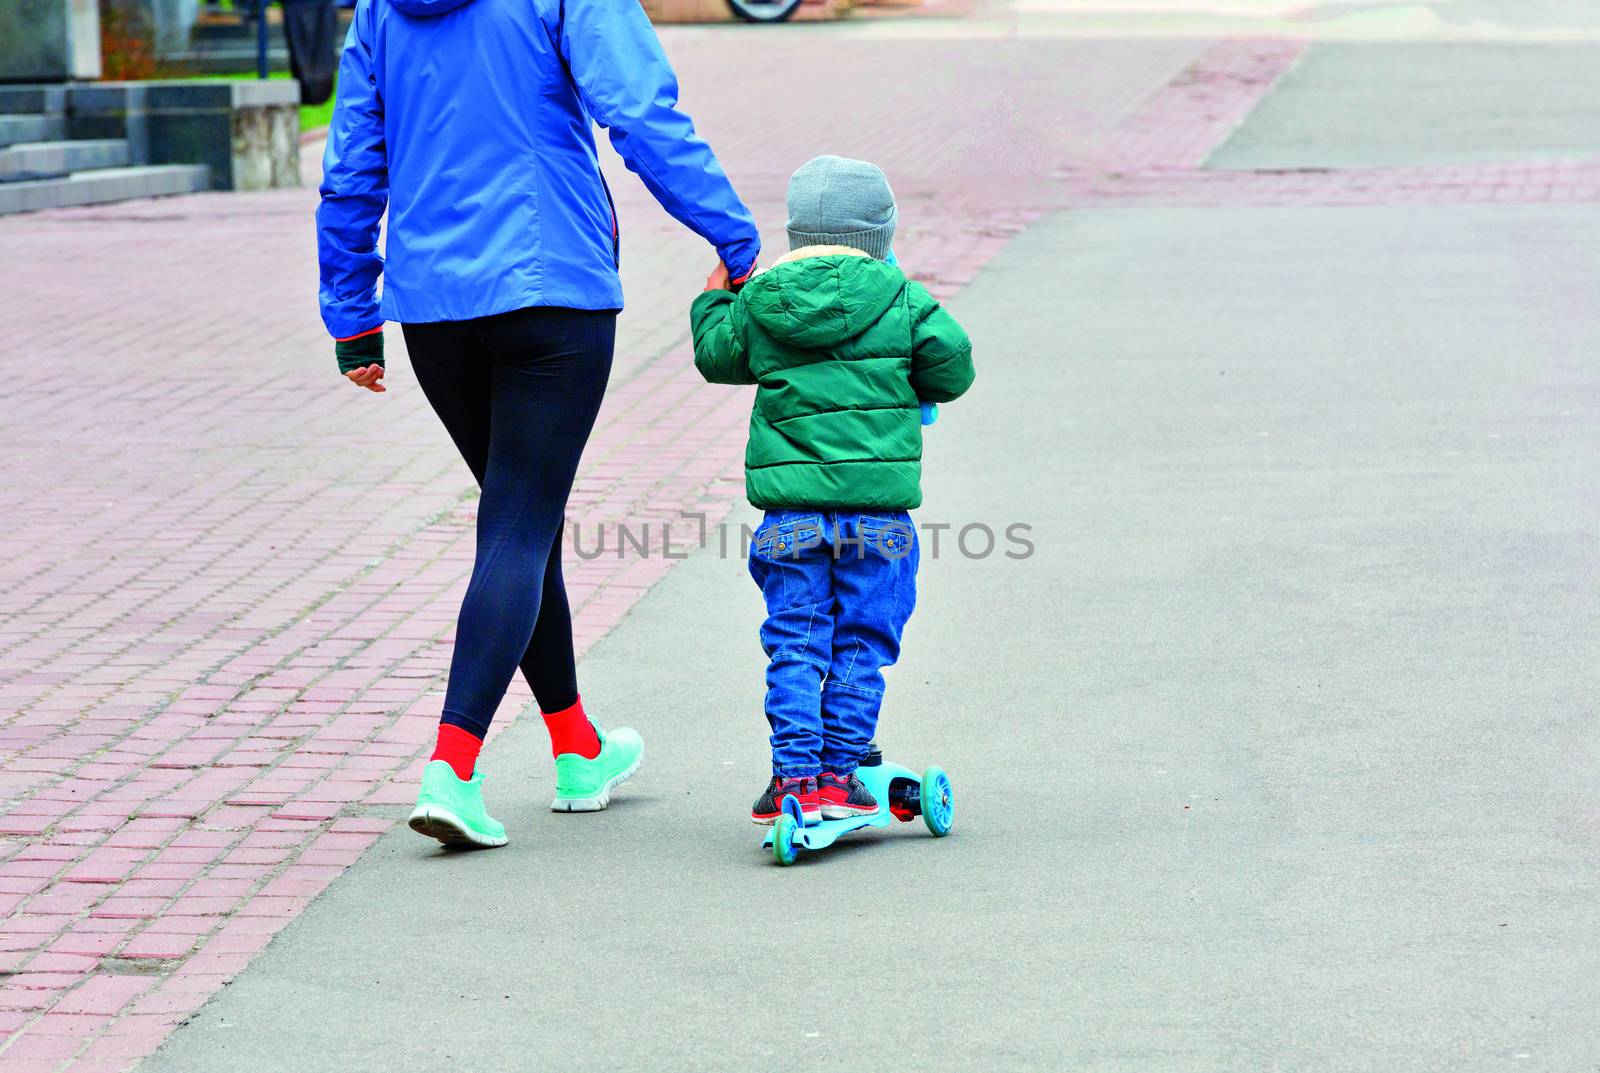 The kid in blue jeans and a green jacket on a children's scooter walks with his mother on the paved sidewalk. by Sergii